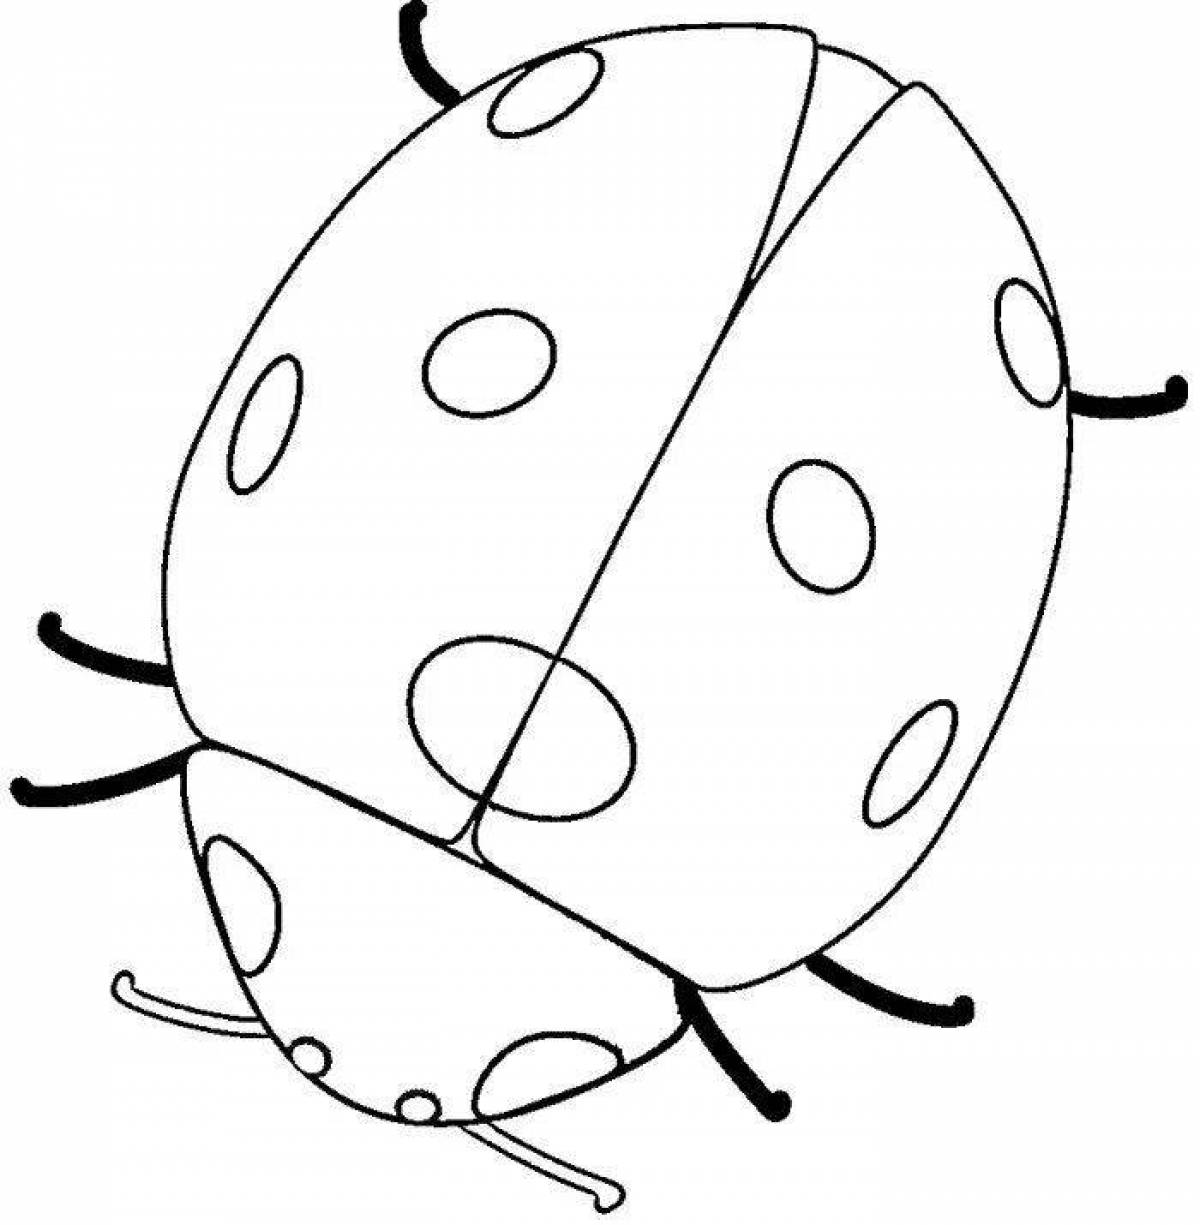 Colourful ladybug coloring book for kids